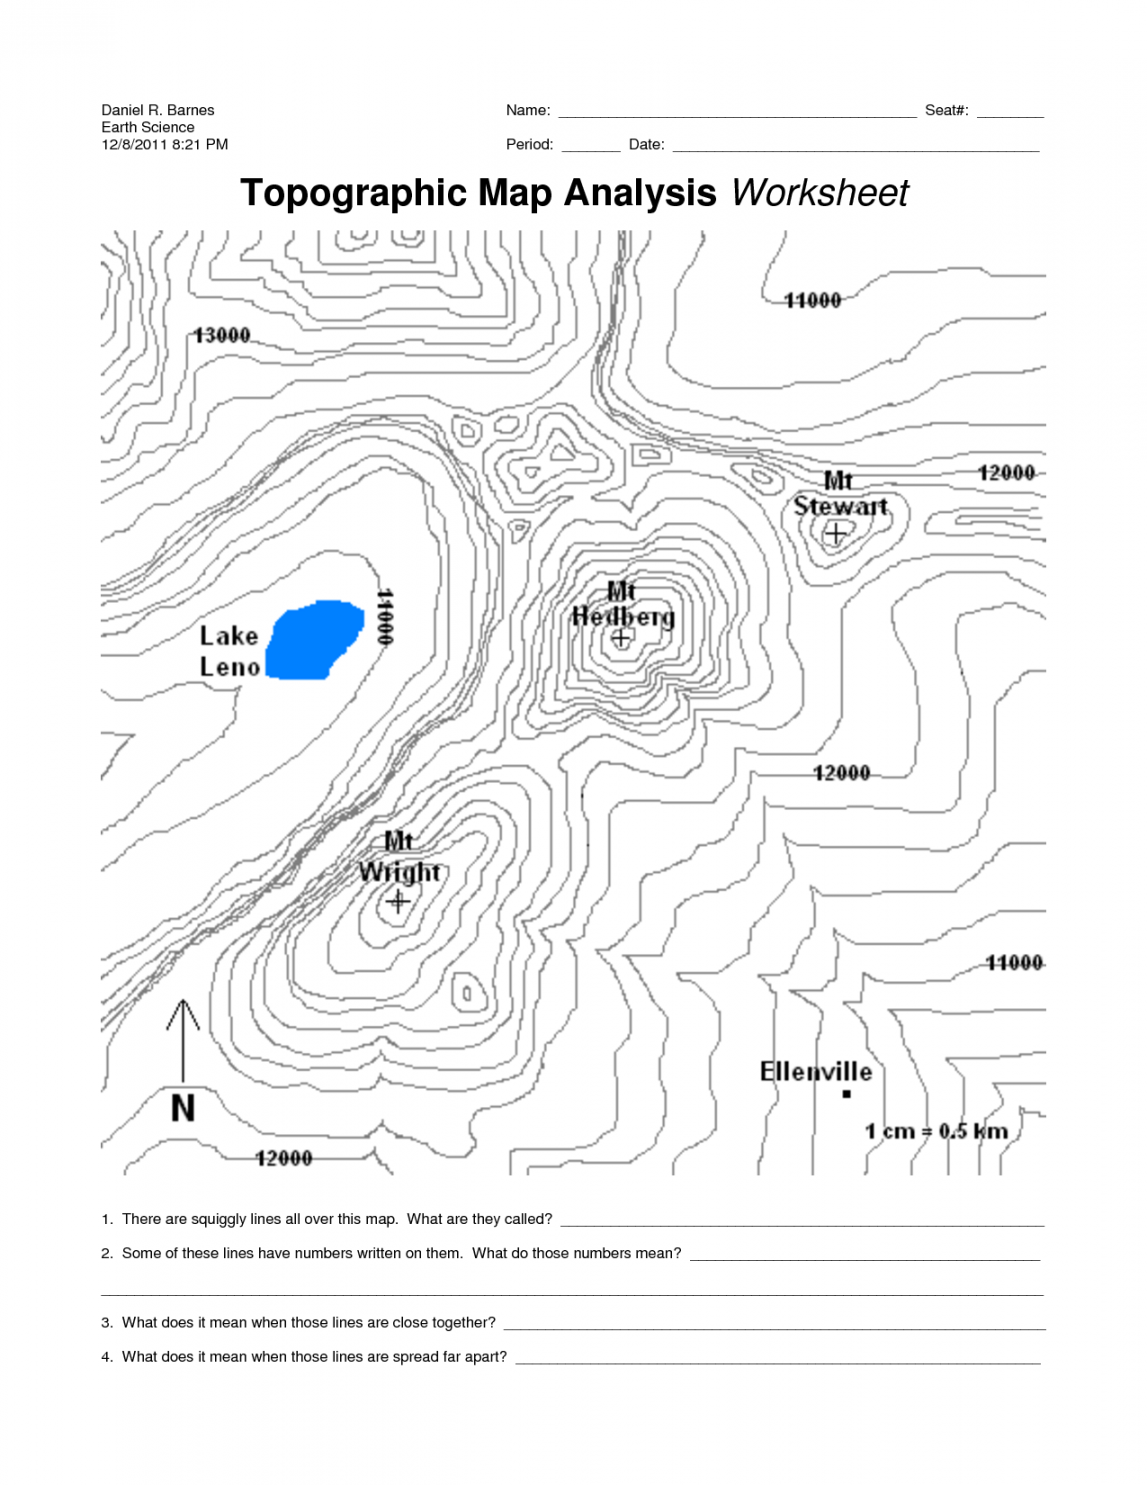 Contour+Lines+Topographic+Map+Worksheets  Map worksheets, Map